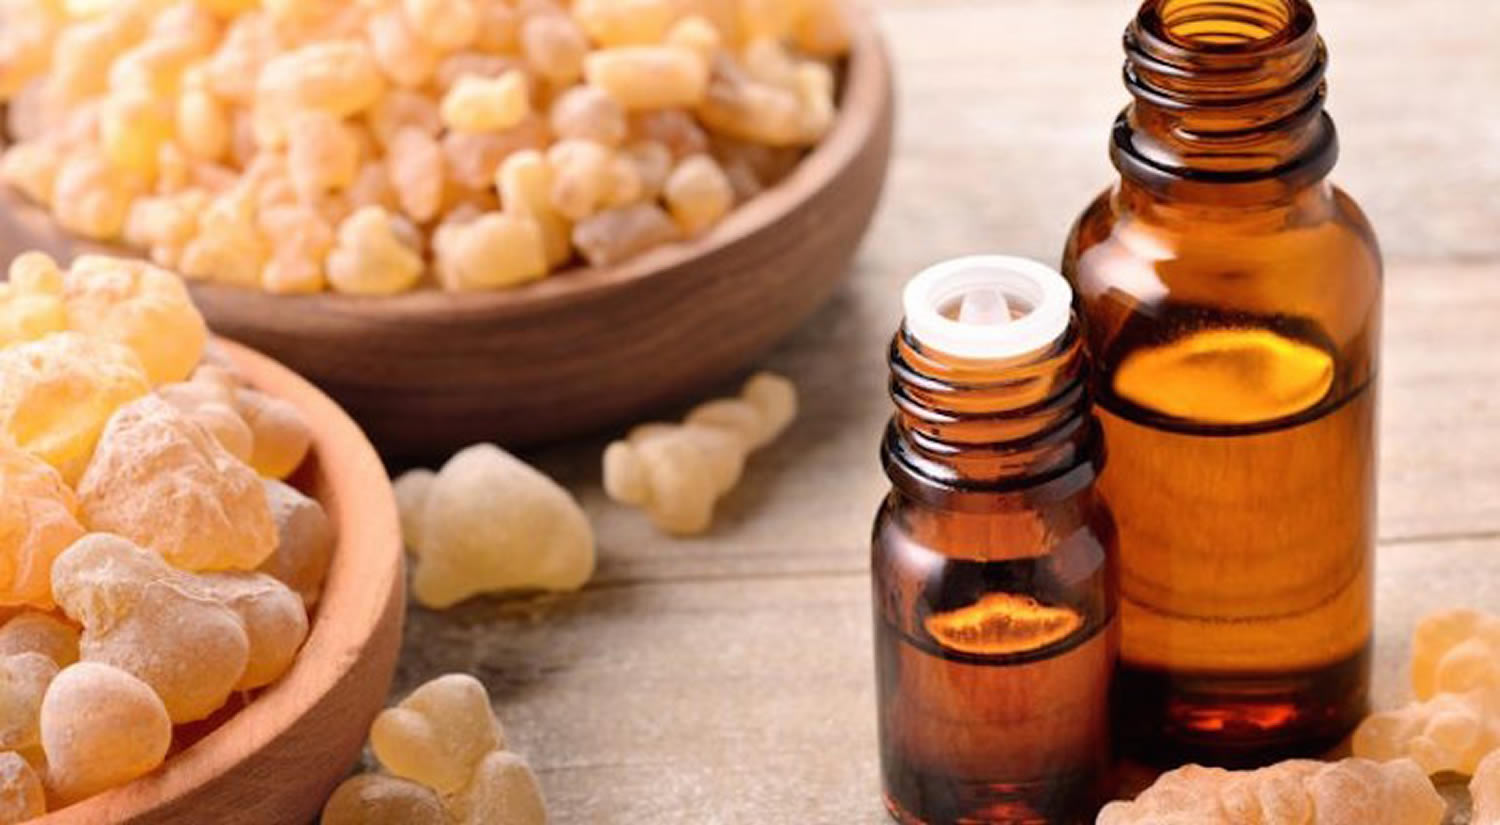 Can Frankincense Oil Help With Skin Cancer? Find Out What Science Has To Say